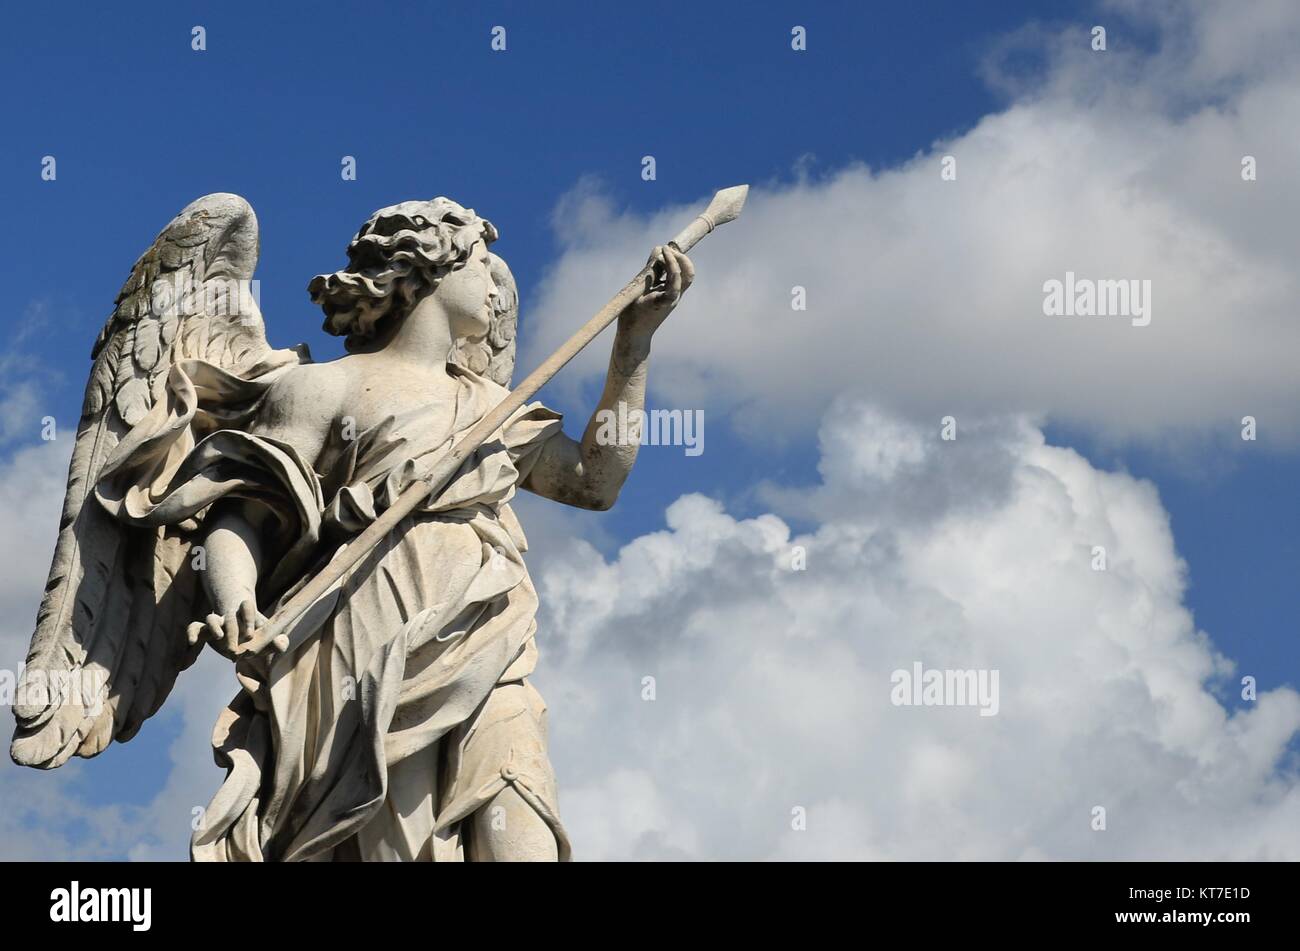 Sculpture of 'The Angel with the lance' from Ponte Sant'Angelo, also known as the Bridge of Angels in Rome, Italy. Stock Photo